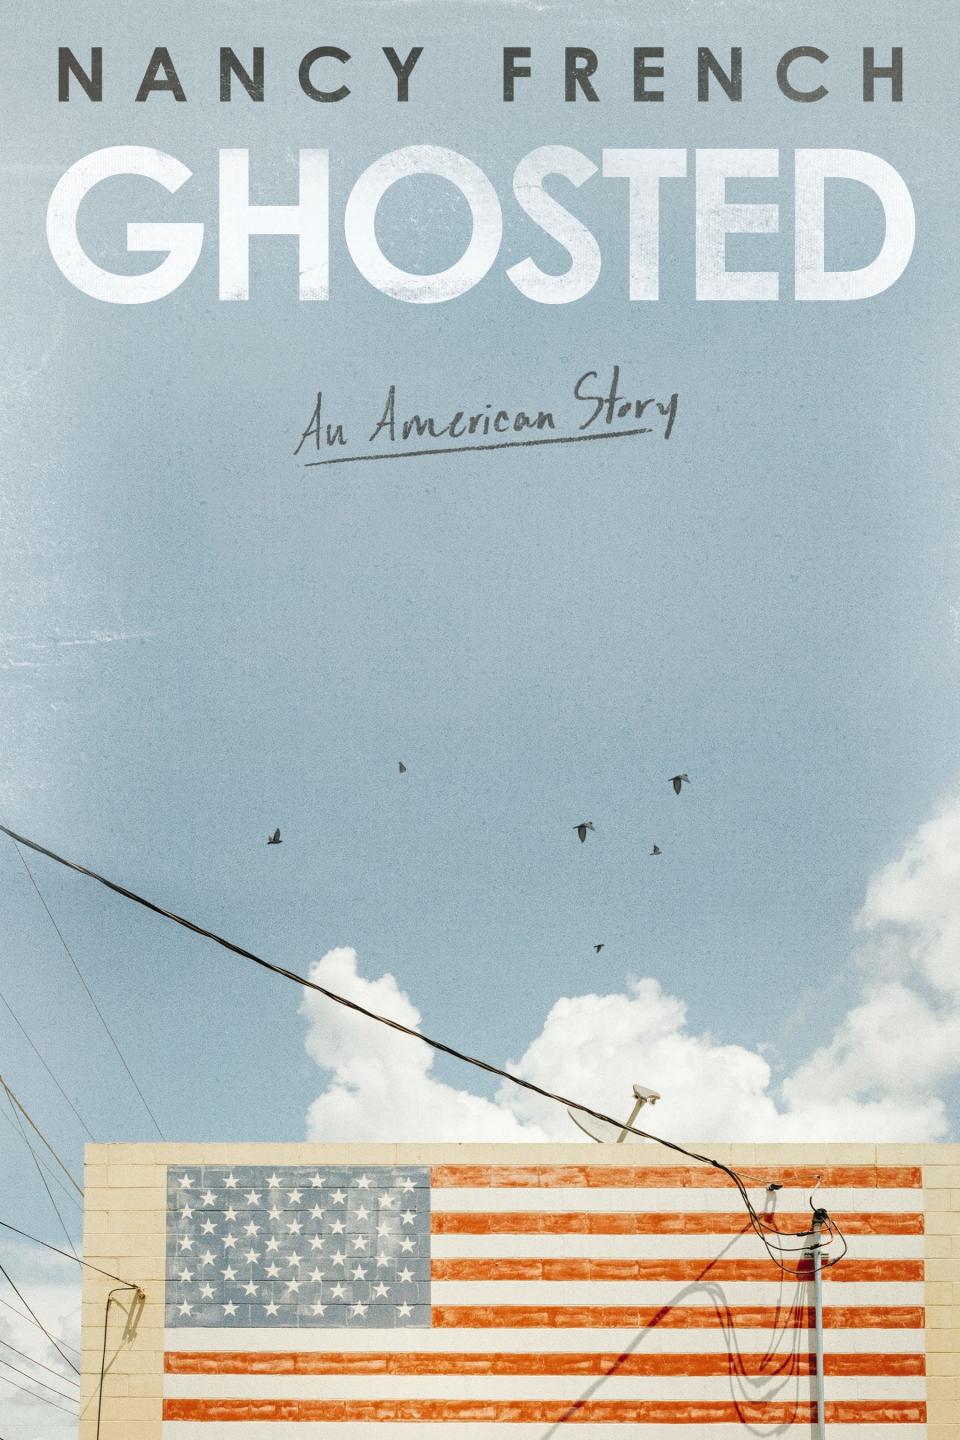 Nancy French's memoir "Ghosted: An American Story" traces the author's experiences from ghost writing for prominent Republicans to reporting a news series about abuse at a Christian camp, and how it affected her faith and political views.